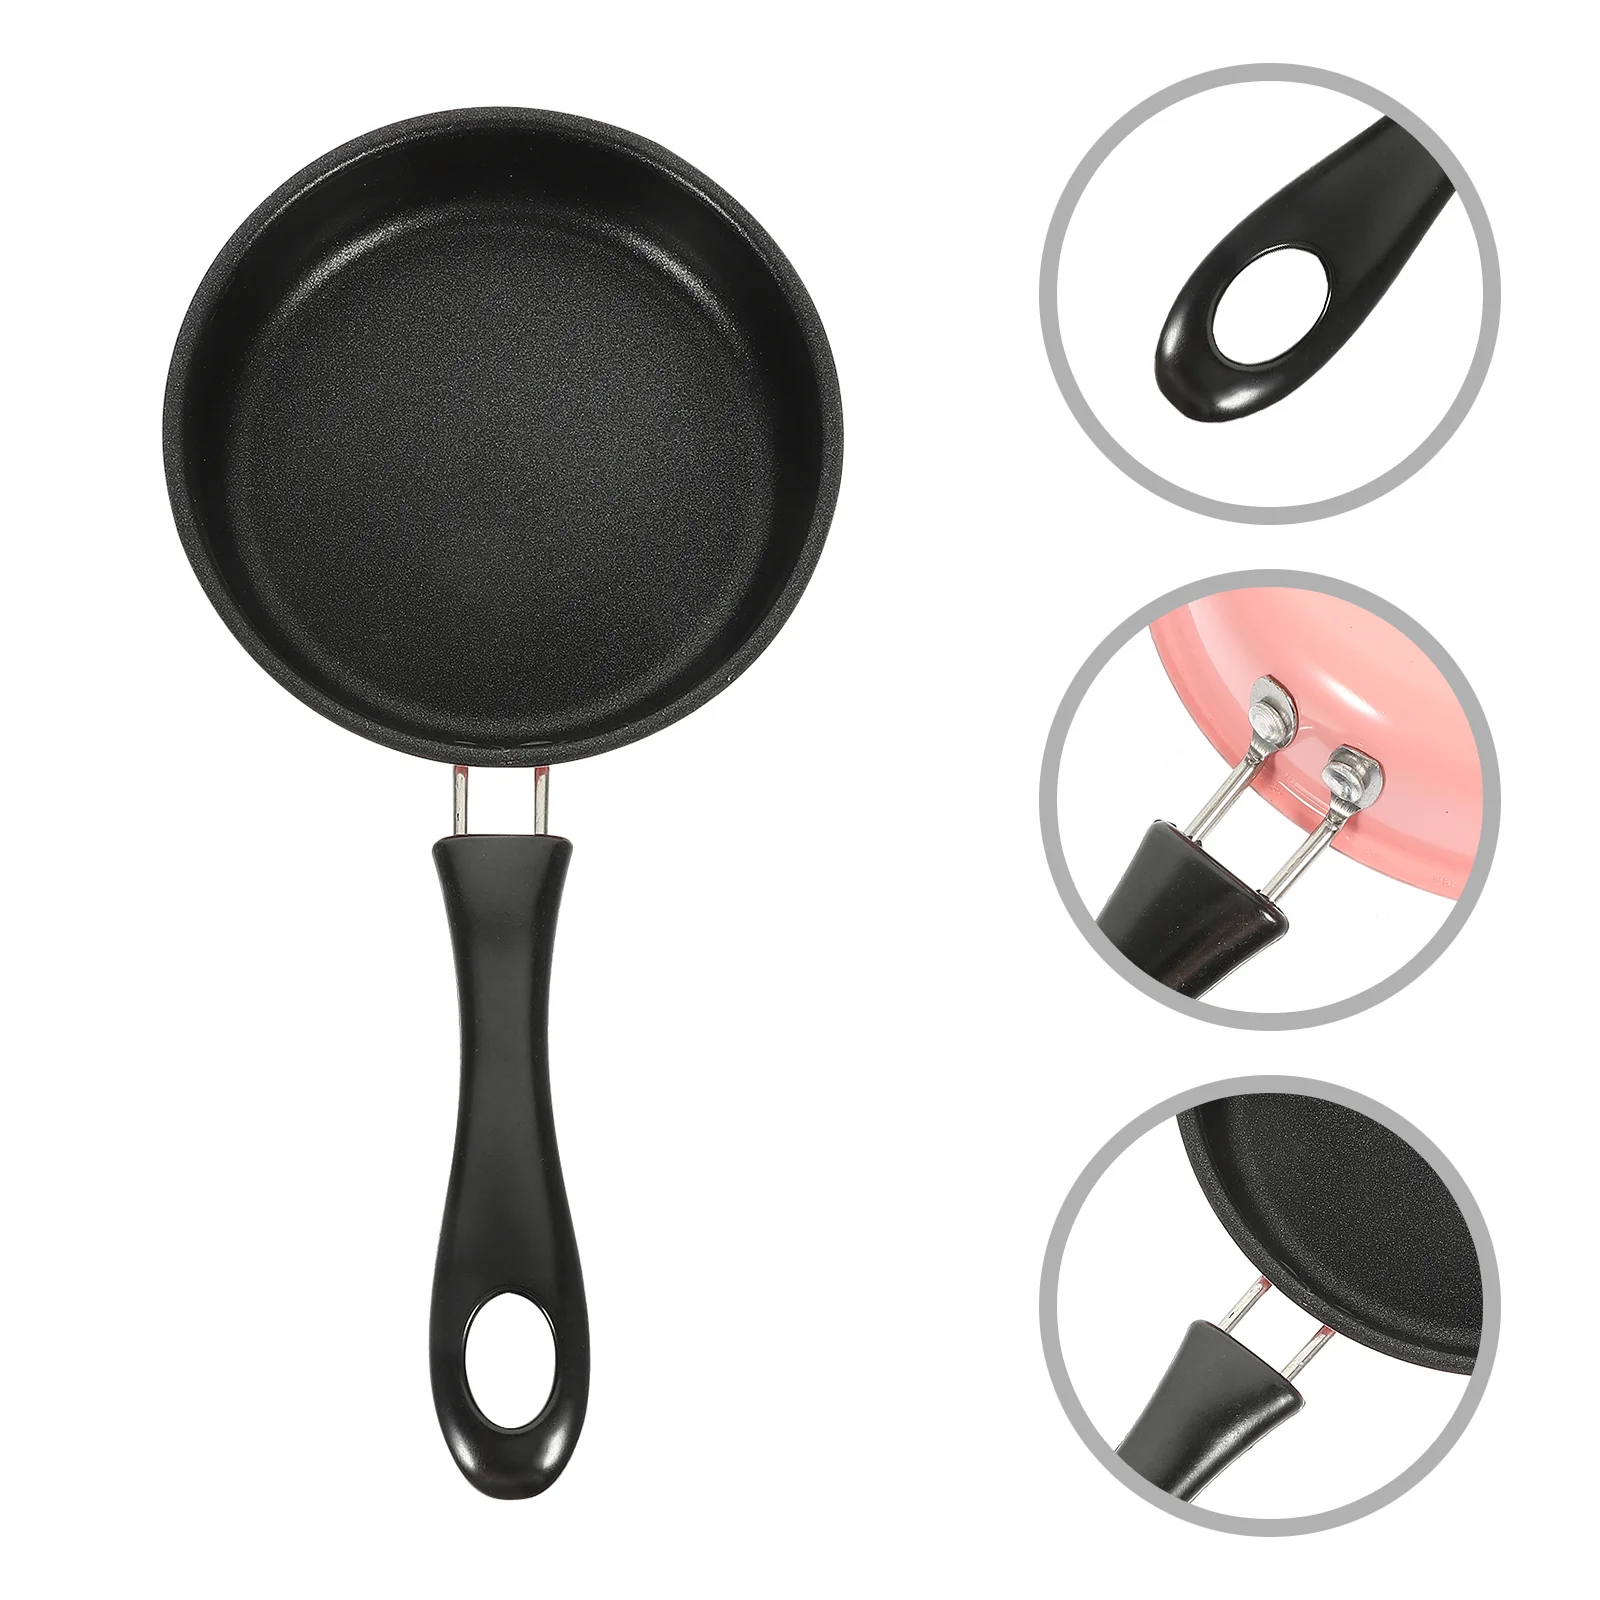  Nonstick Frying Pan, Mini Frying Pan Stainless Steel Prevent  Stick Induction Pot Round Breakfast Small Fry Egg Pan with Long Handle for  Home Restaurant Kitchen (Pink): Home & Kitchen